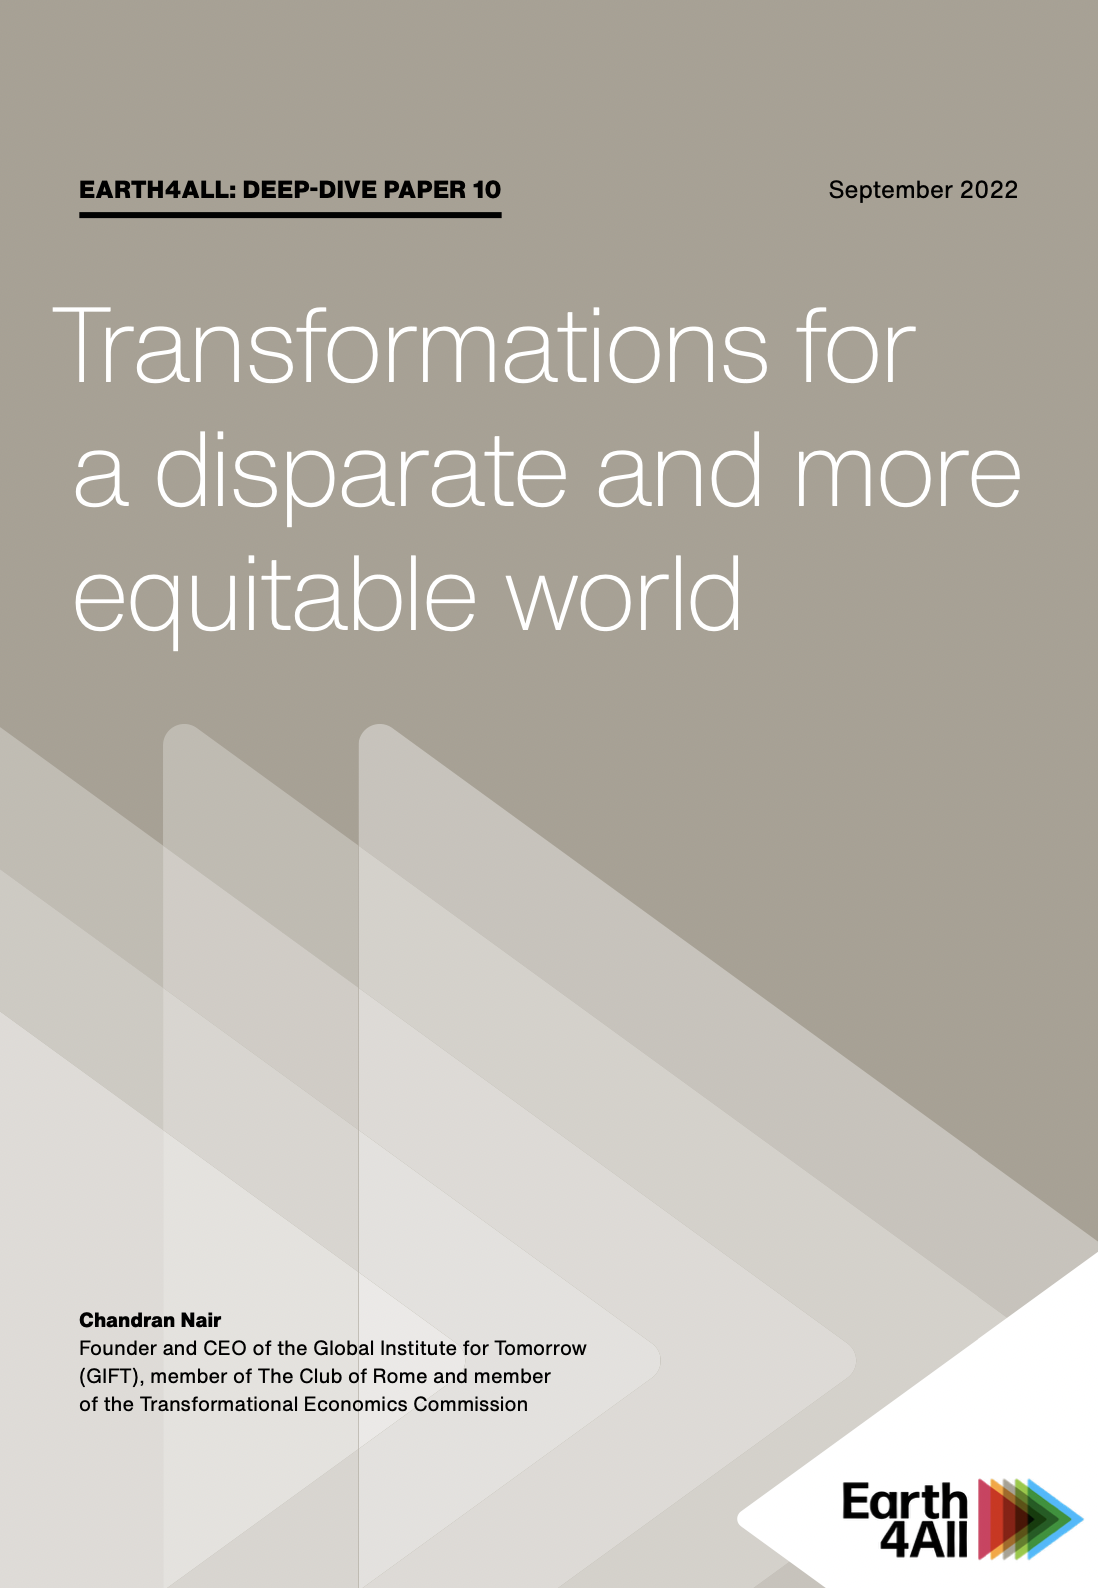 Transformation for a disparate and more equitable world